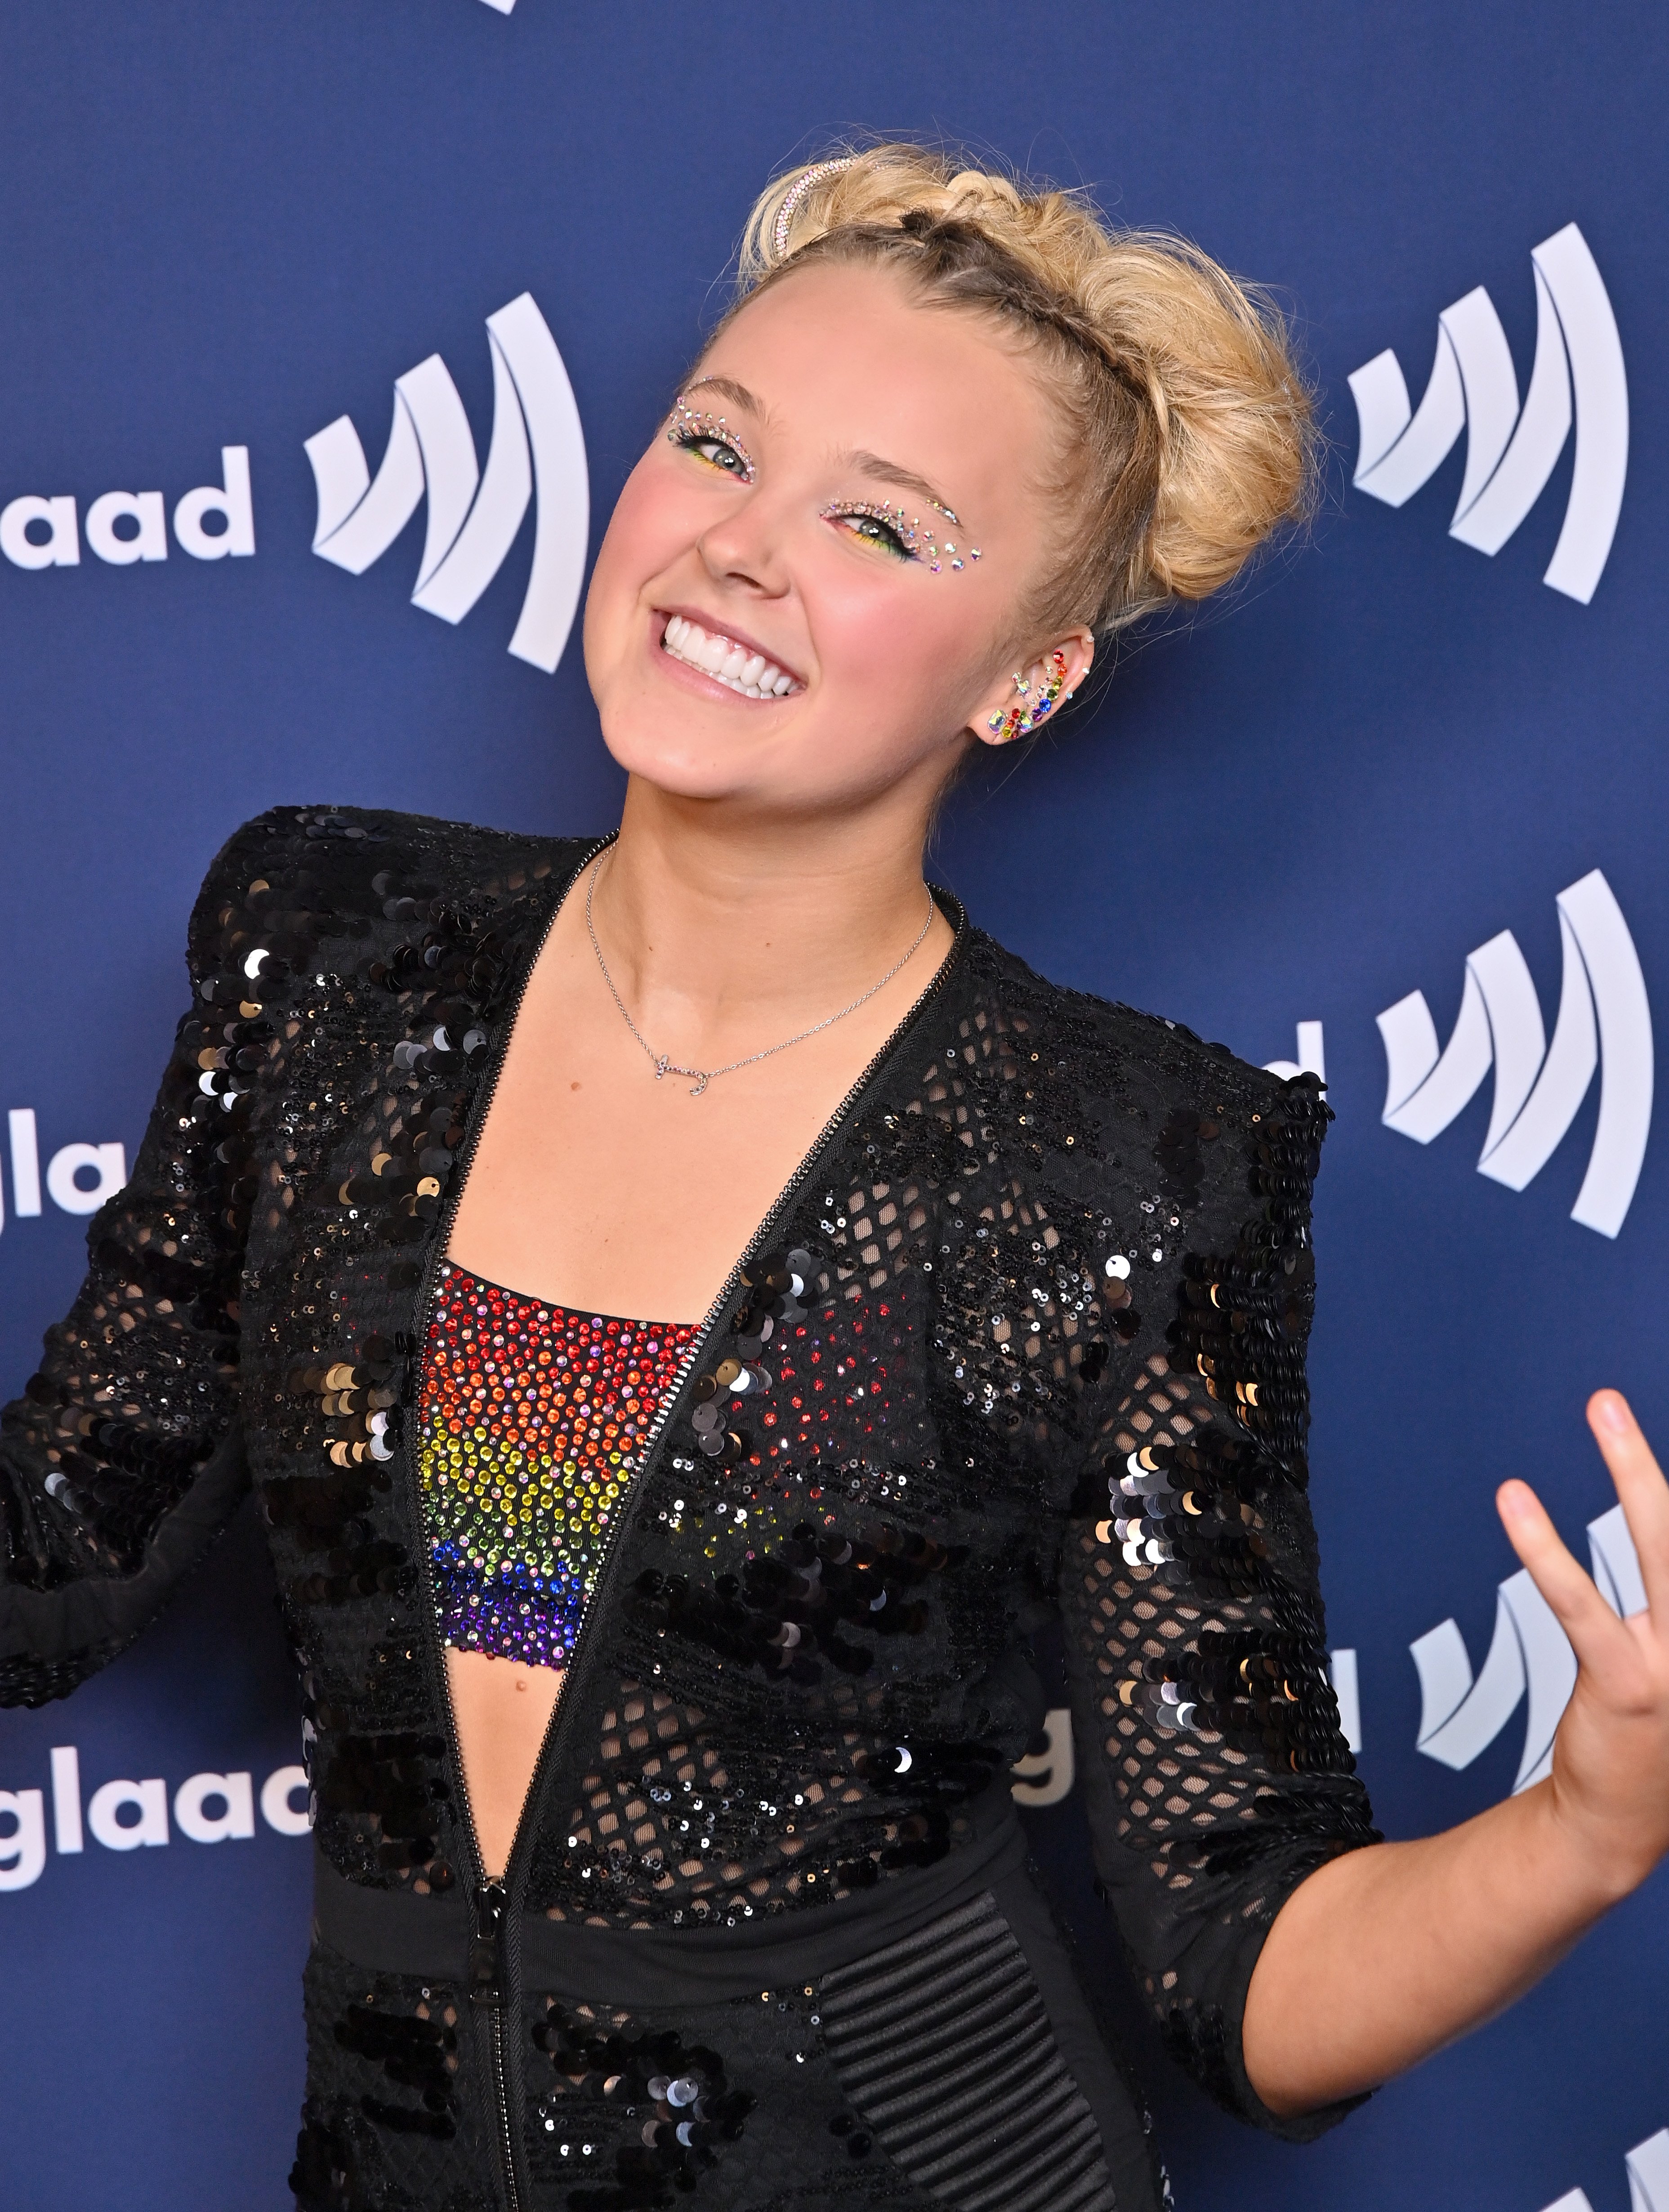 JoJo Siwa at The 33rd Annual GLAAD Media Awards at The Beverly Hilton on April 02, 2022 in Beverly Hills, California. | Source: Getty Images